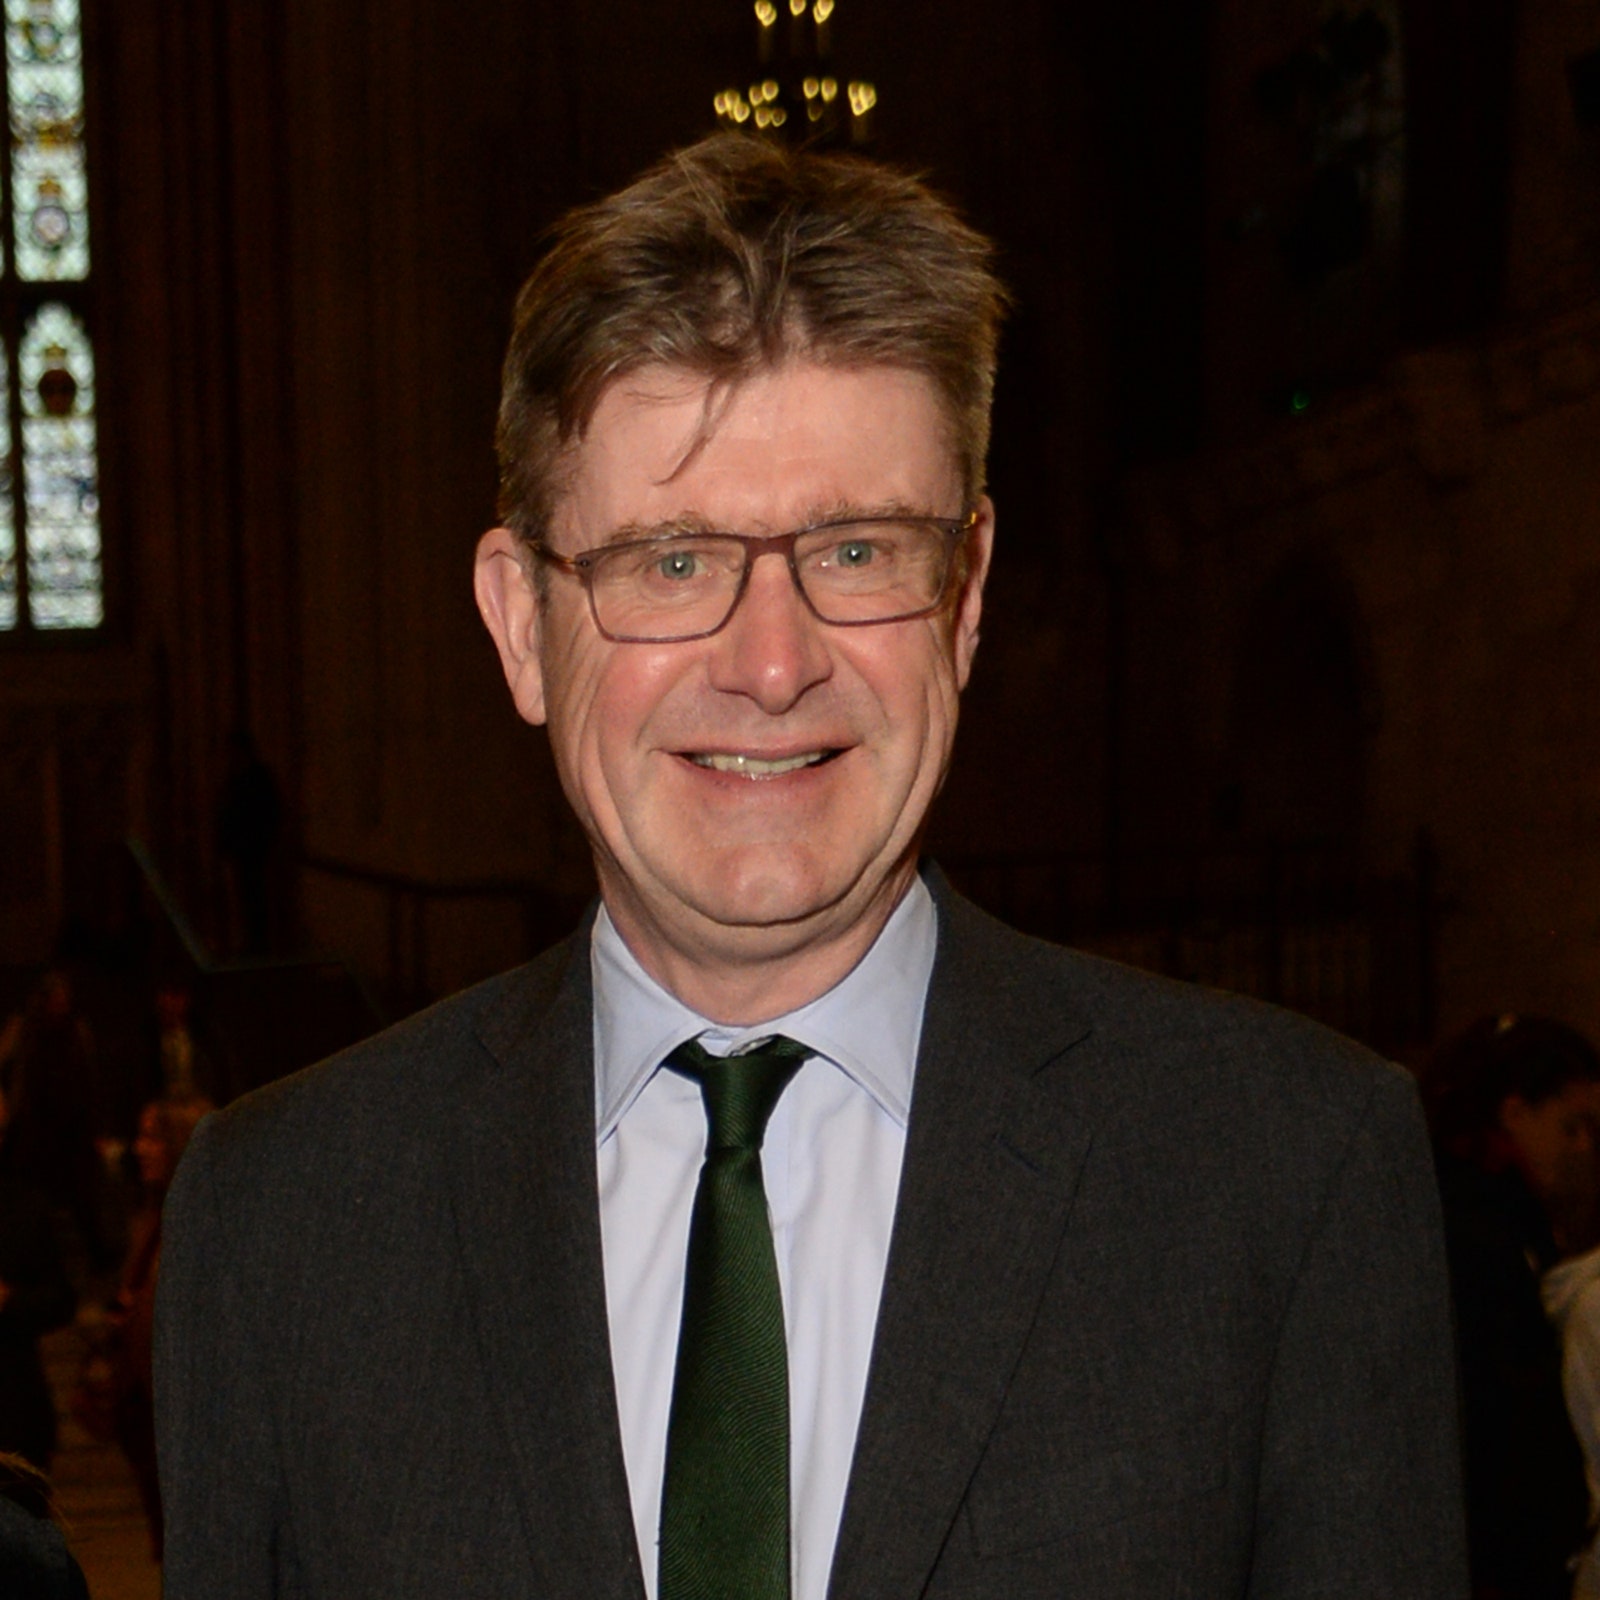 The Rt. Hon. Greg Clark is the Conservative MP for Tunbridge Wells and Chair of the Science Innovation and Technology...